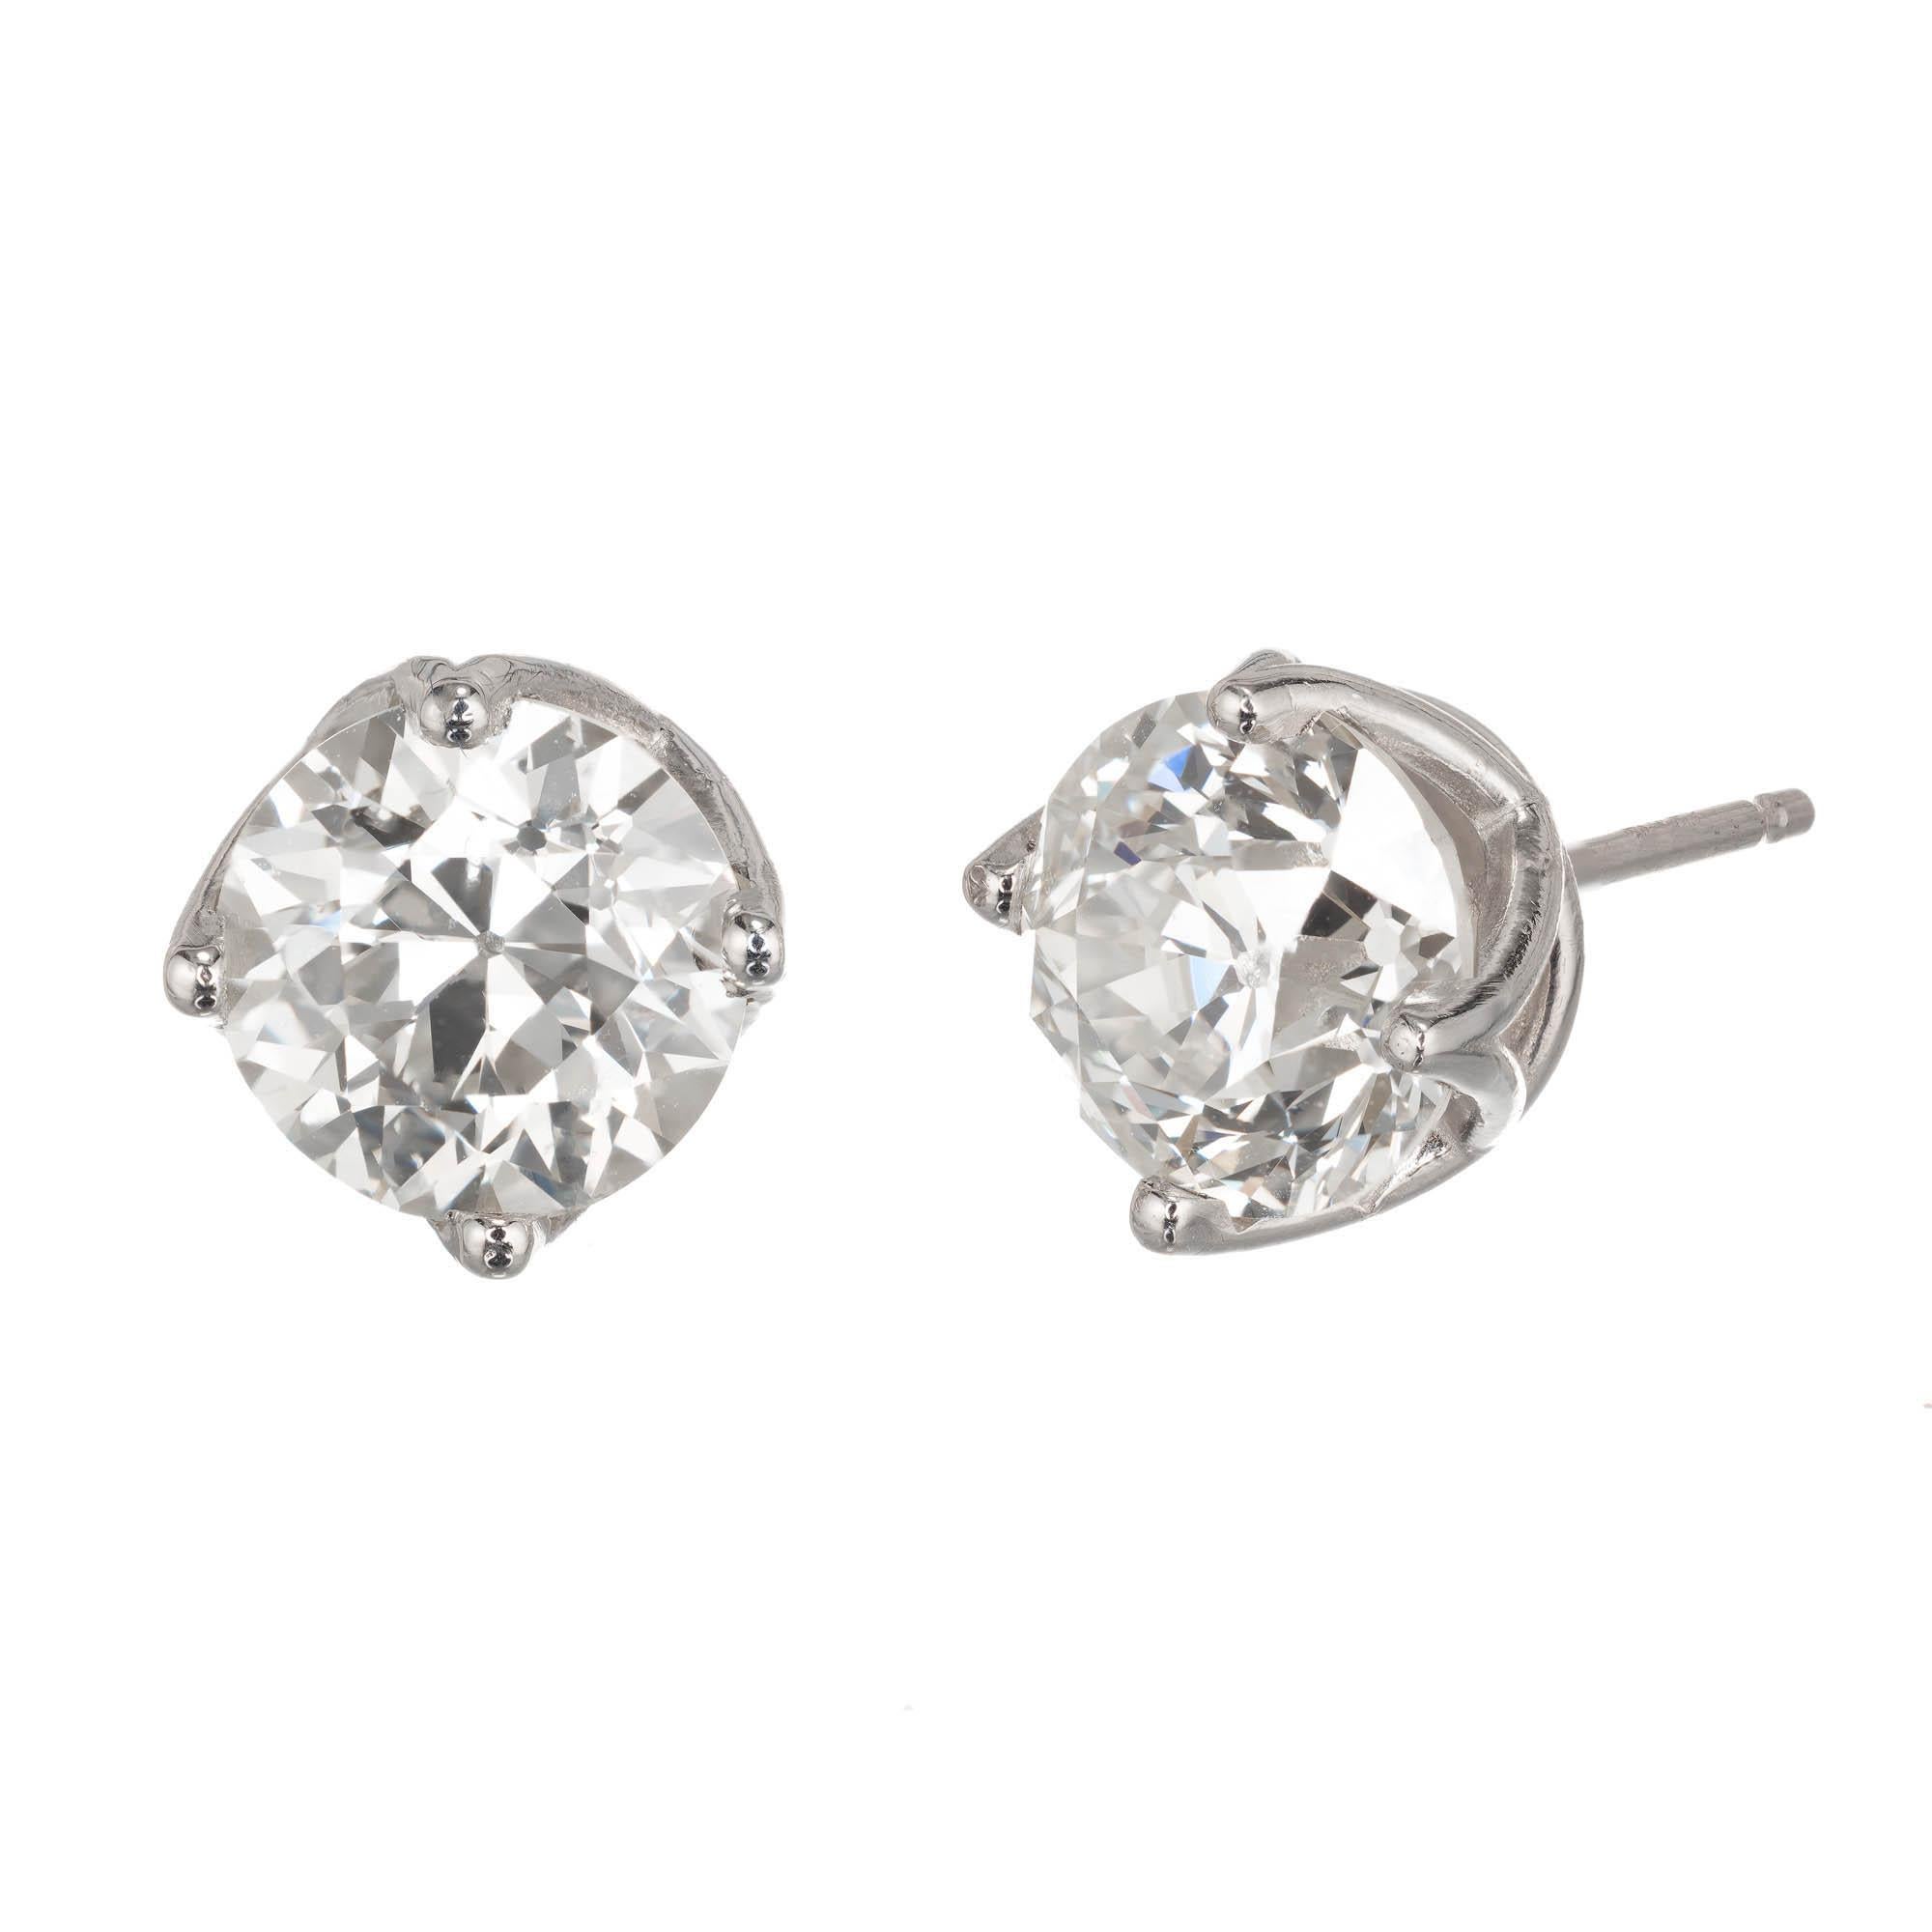 Old European cut diamond stud earrings.  2 old European diamonds in platinum curved prong baskets. Crafted in the Peter Suchy Jewelers Workshop. 

1 old European cut M SI diamond, Approximate 1.59 carats. Gia Certificate # 2781819383
1 old European